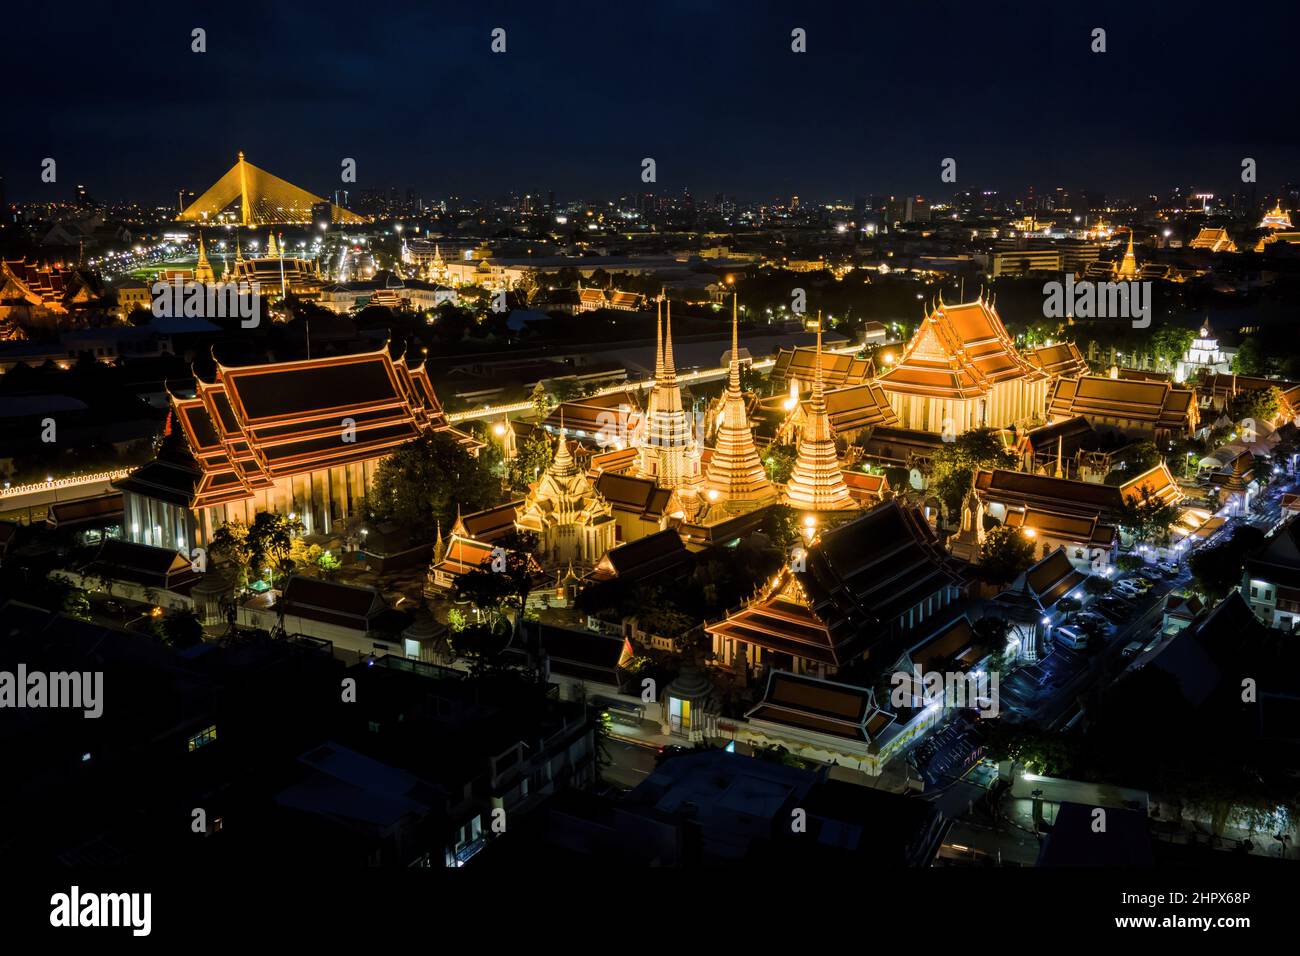 (EDITOR'S NOTE: Image taken with drone)Aerial view of the Grand Palace in Bangkok. Two of Thailand's most famous cultural heritage sites and tourist attractions, Wat Arun (Temple of Dawn) and The Grand Palace, are illuminated at night along the Chao Praya River in Bangkok. The Thai Government recently announced eased entry requirements for international tourists visiting Thailand amidst a surge in the Omicron variant of COVID-19 throughout the country, with cases topping 20,000 reported infections per day. (Photo by Matt Hunt/SOPA Images/Sipa USA) Stock Photo